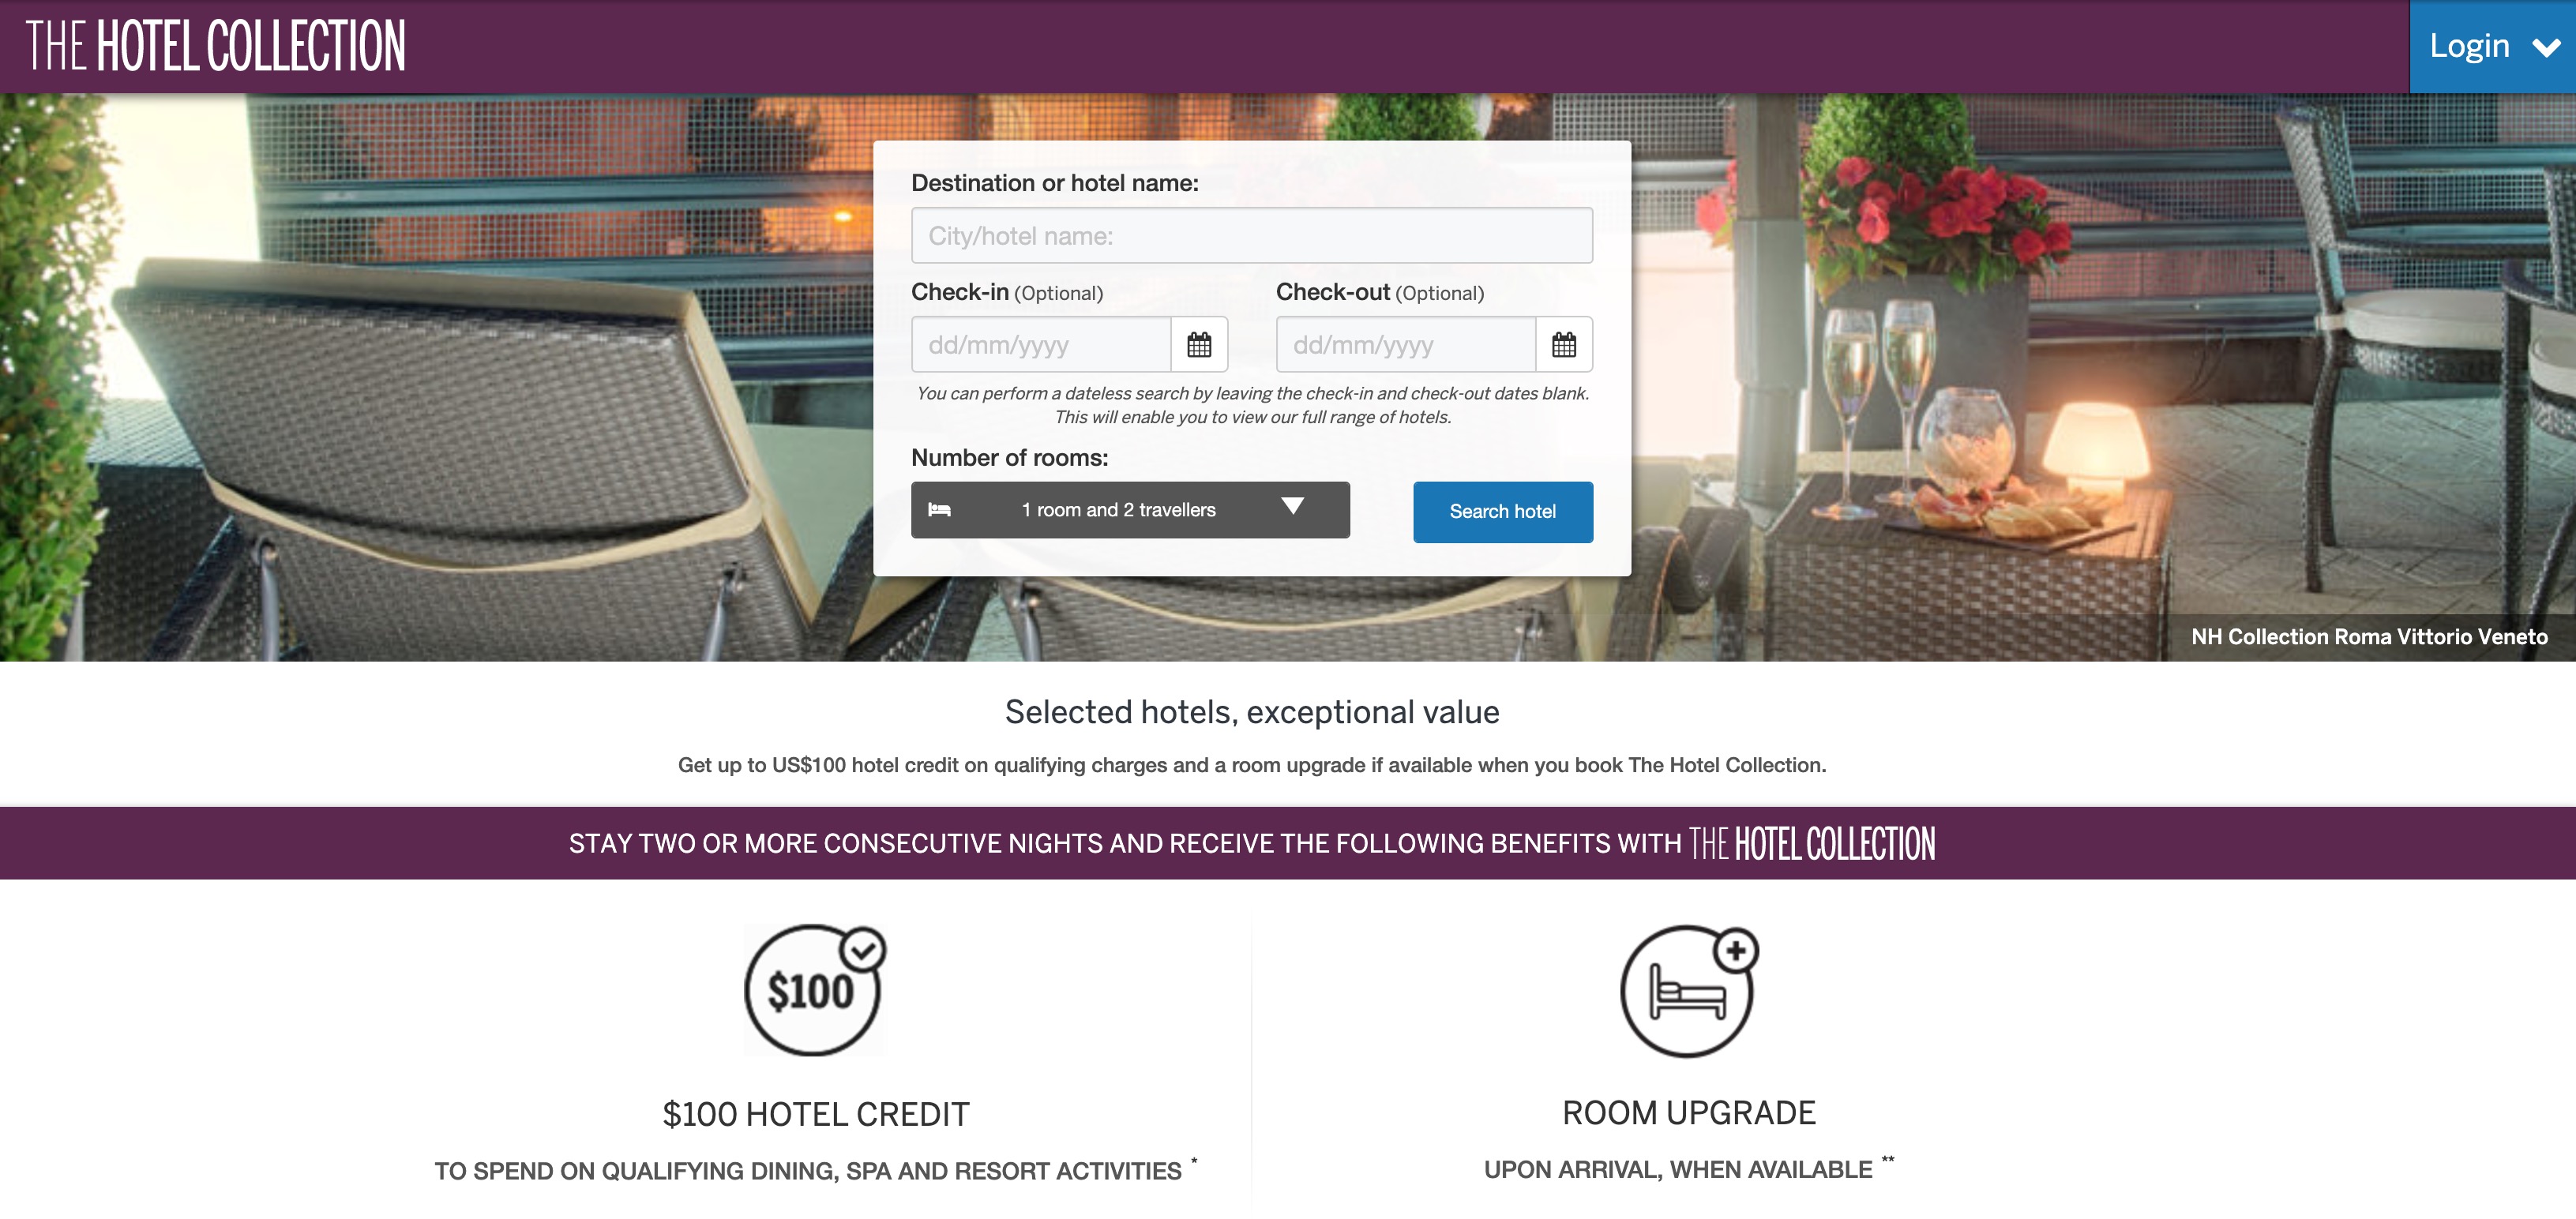 An introduction to Amex's The Hotel Collection program - Point Hacks